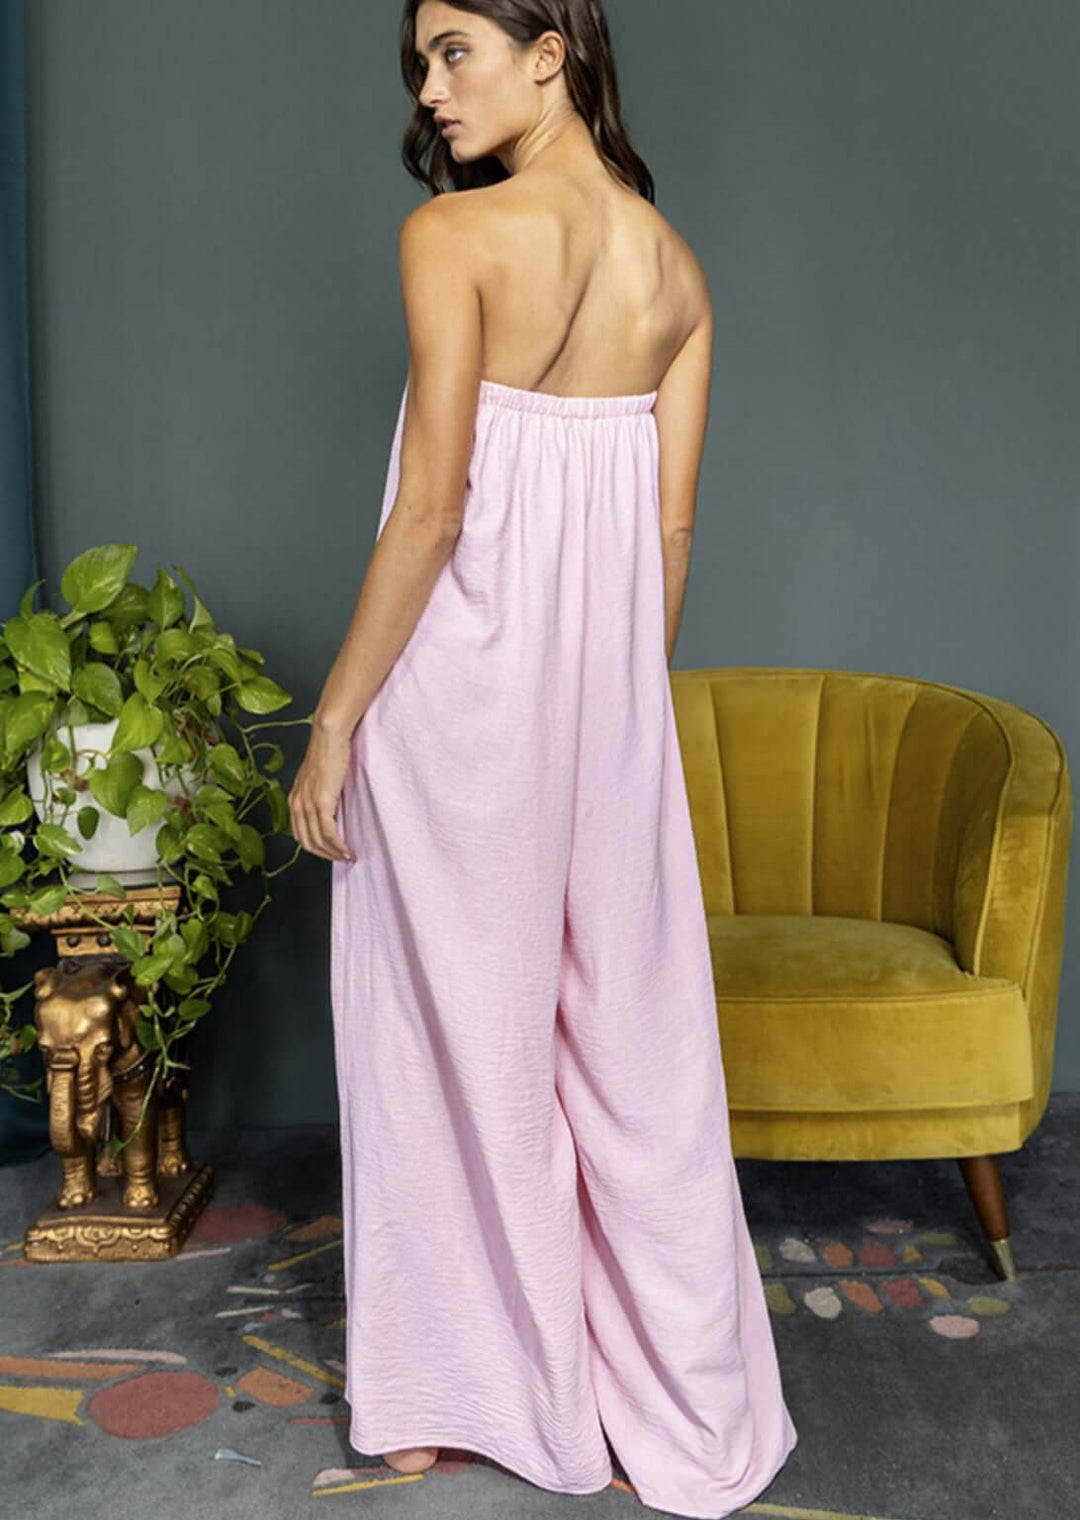 Bucket List Clothing Style R5307 | Ladies Strapless Flowy Pink Jumpsuit with Inverted Front Pleating and Side Pockets | Made in USA